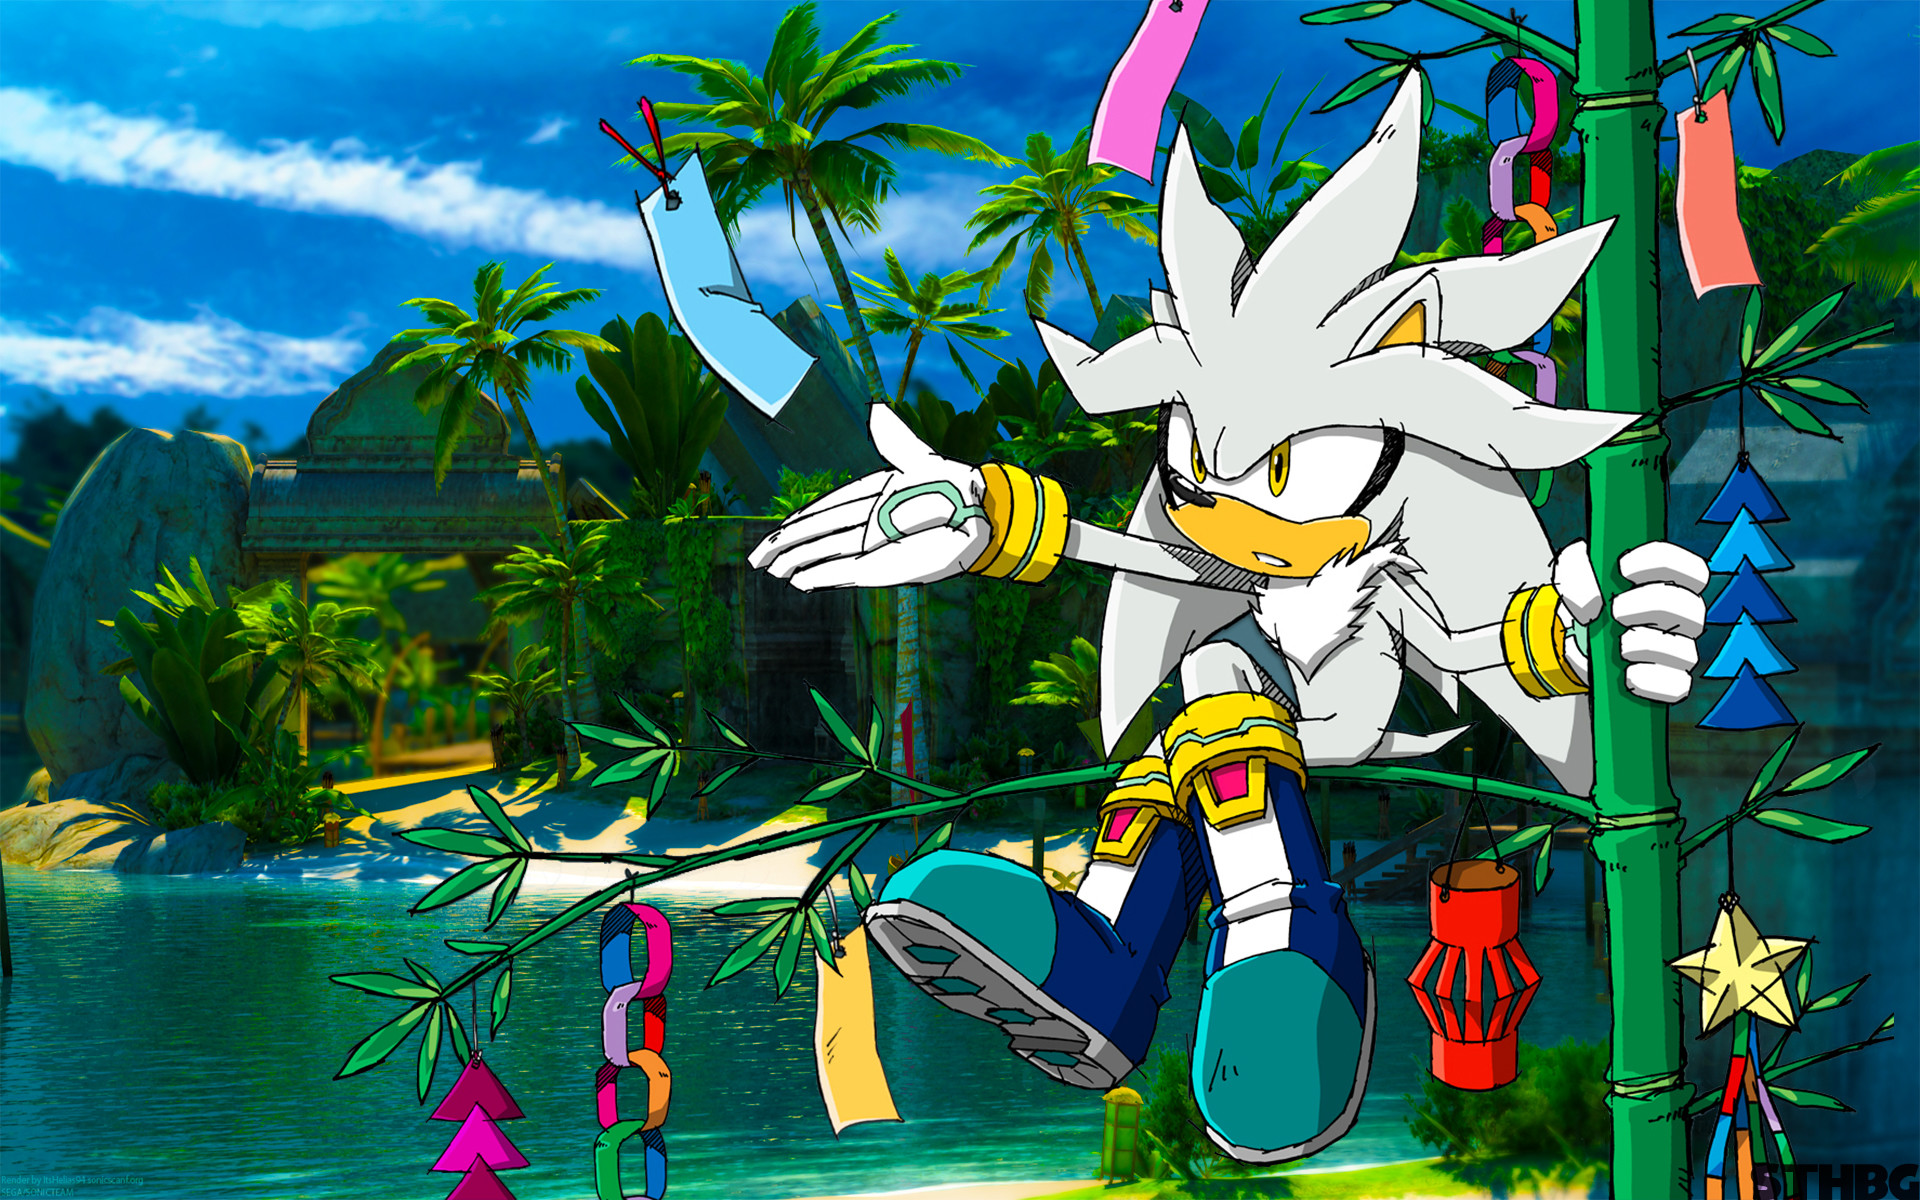 1920x1200 Silver The Hedgehog - Wallpaper by SonicTheHedgehogBG Silver The Hedgehog -  Wallpaper by SonicTheHedgehogBG